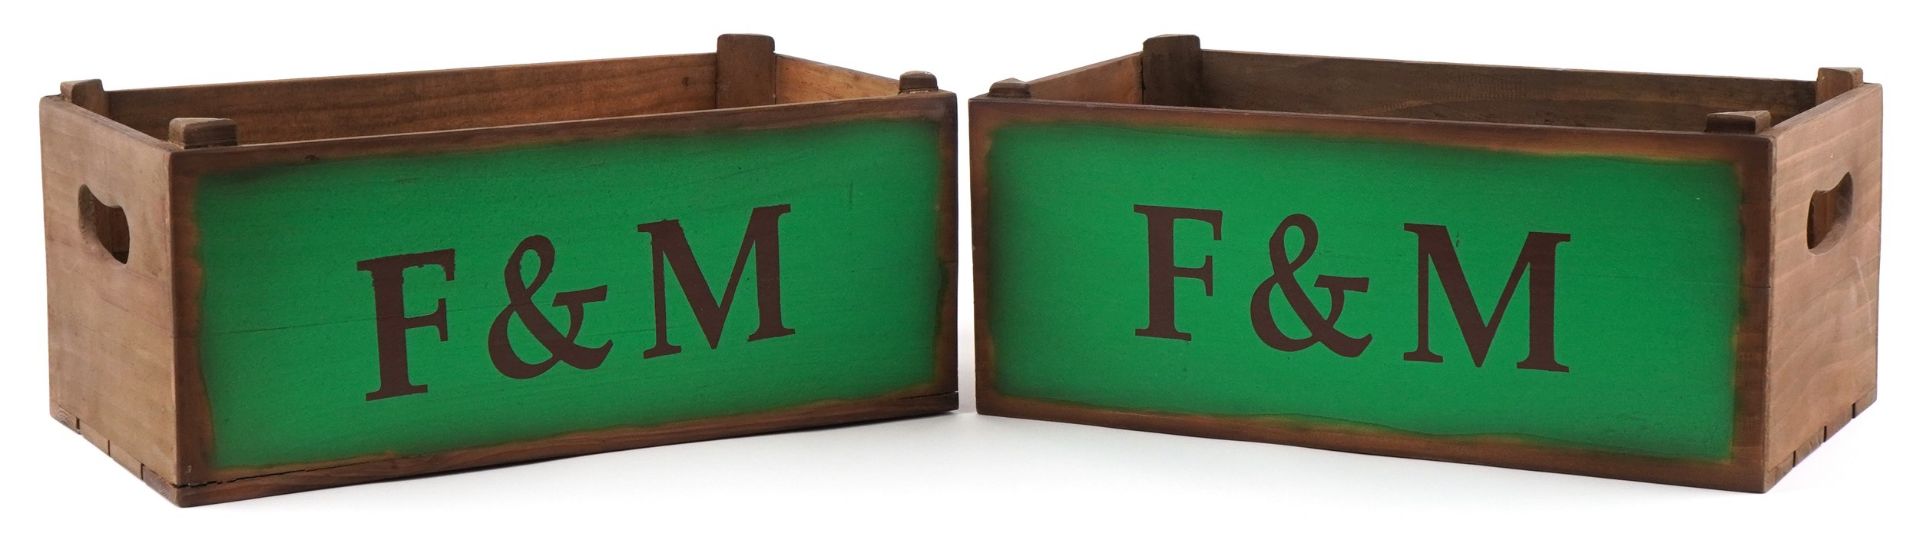 Pair of Fortnum & Mason design painted wooden crates, 18cm H x 44cm W x 25cm D : For further